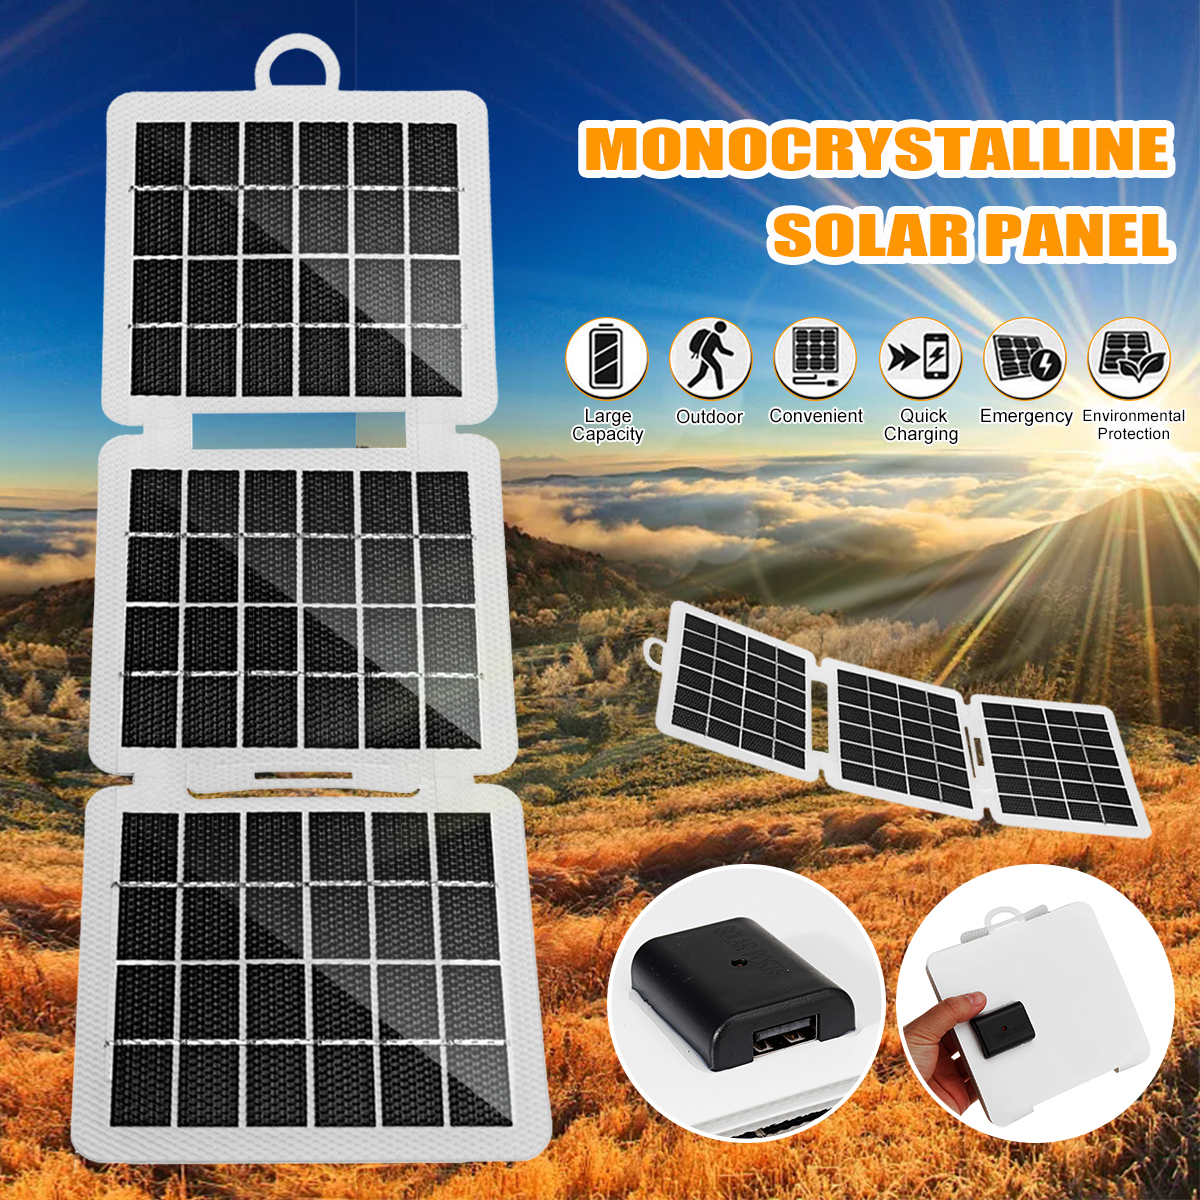 7W-Foldable-Solar-Panel-USB-Output-Port-Portable-Monocrystalline-Charging-Panel-Outdoor-Camping-Emer-1900305-2